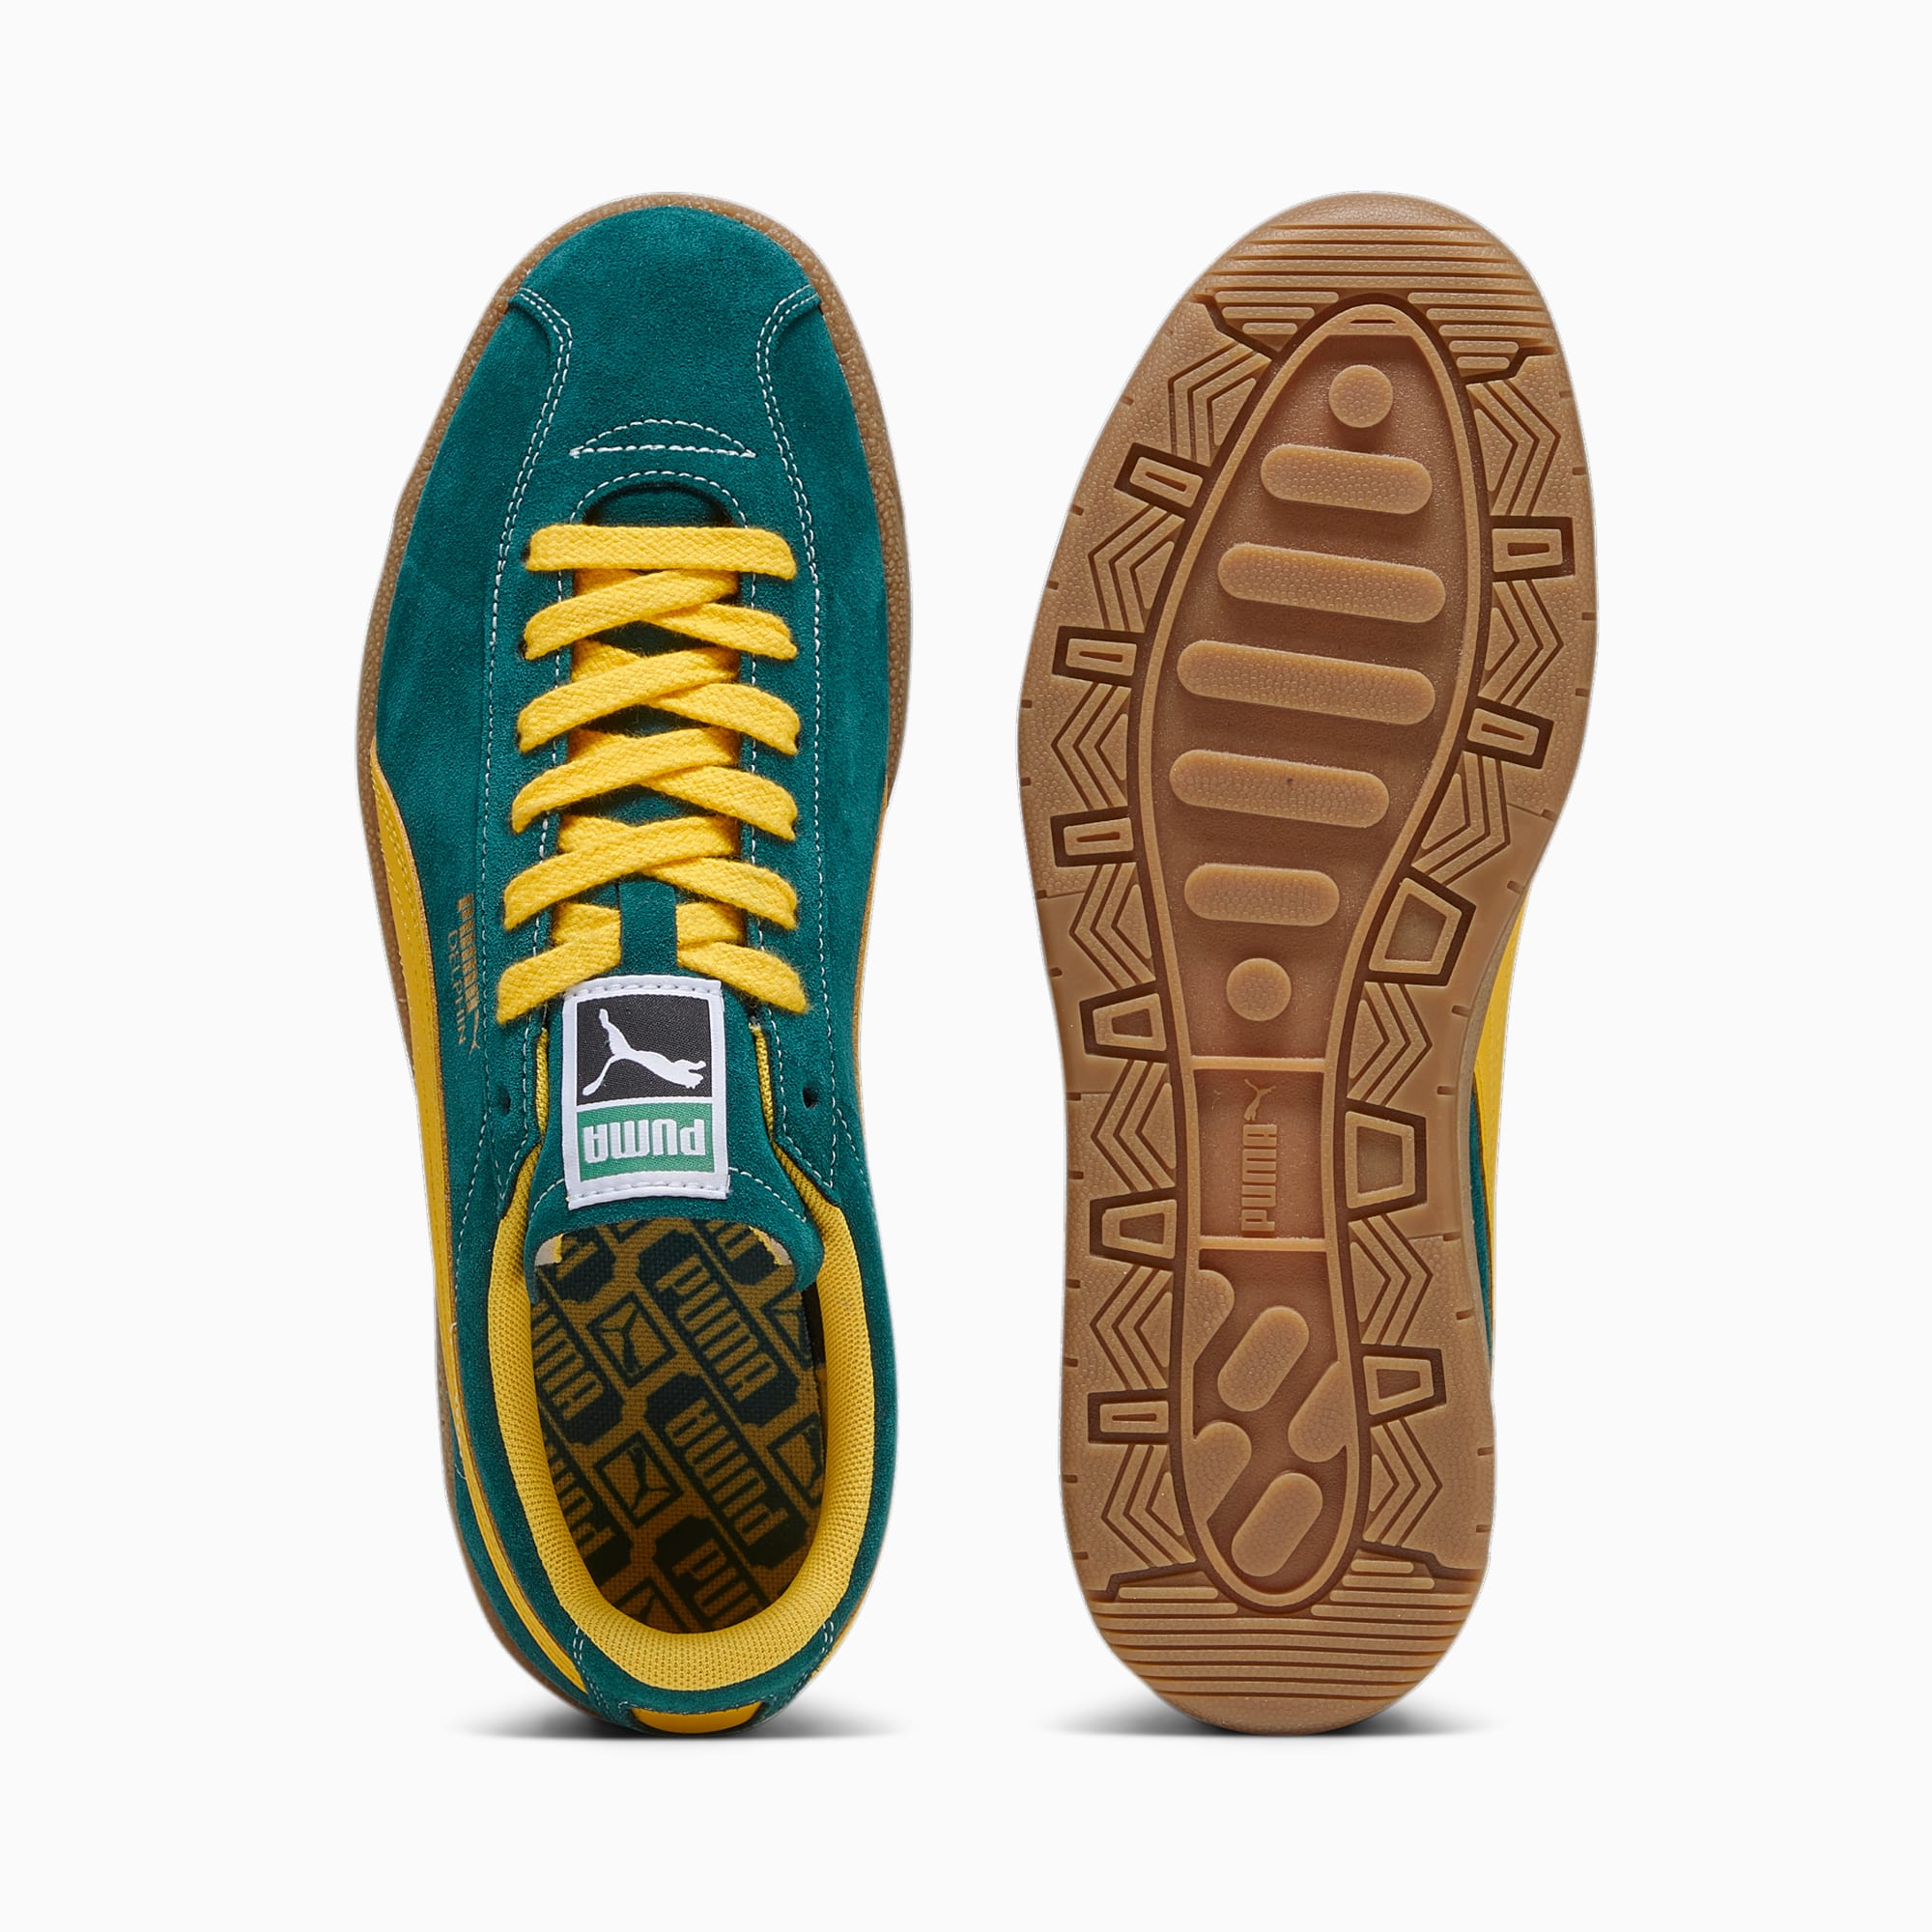 This is the Puma Delphin sneaker in forest green and yellow, an alternative to the Adidas Samba.